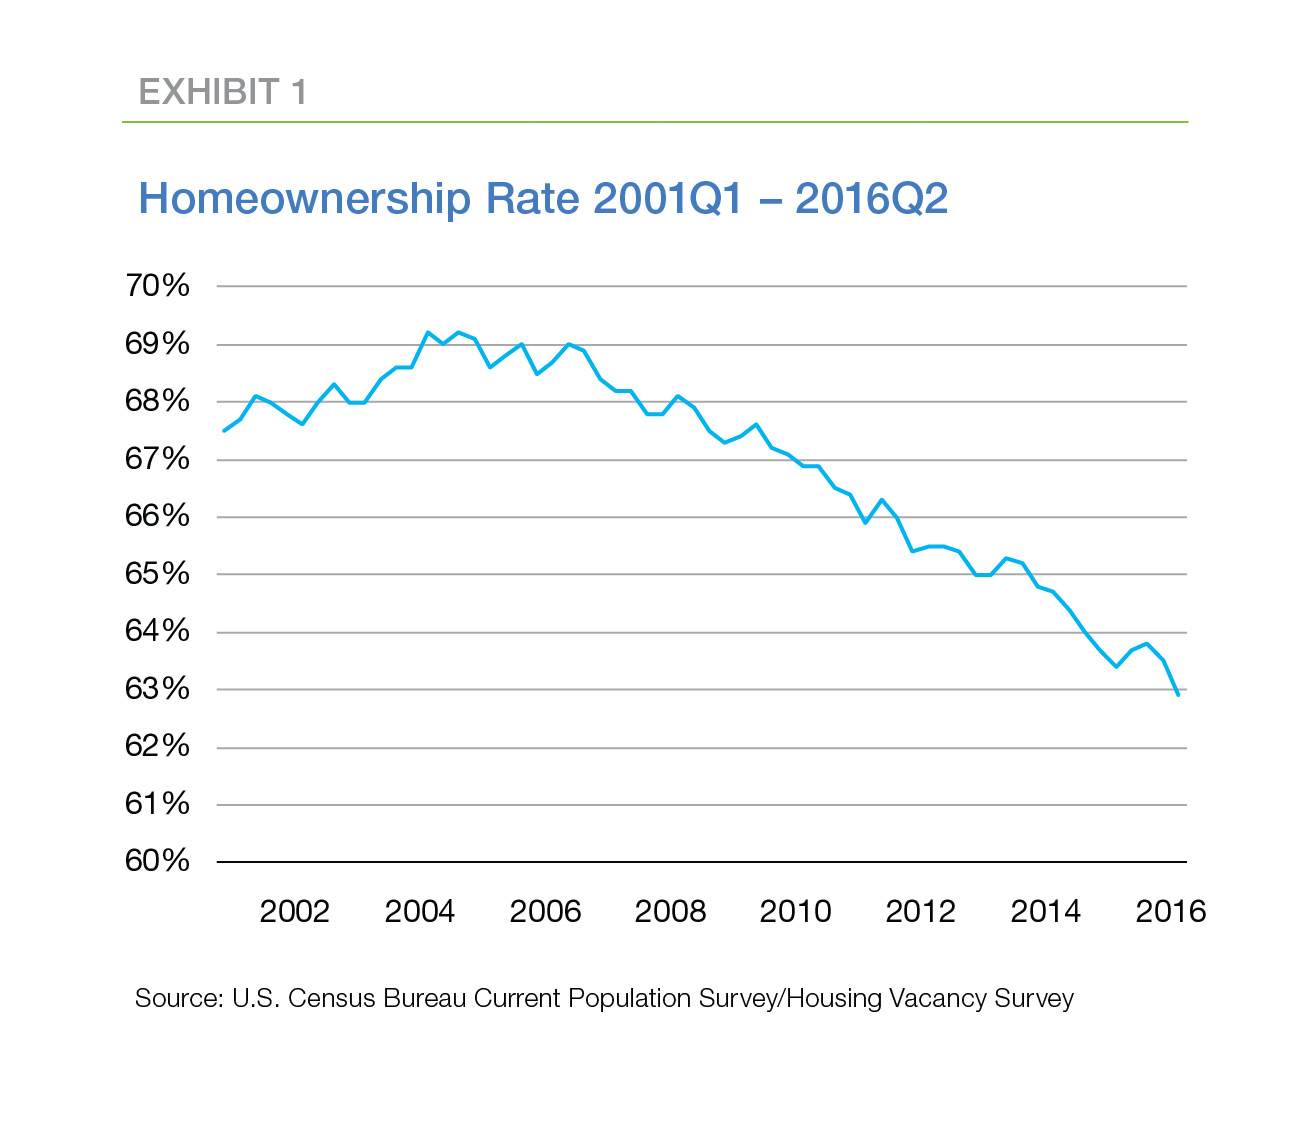 Why are the Experts Pessimistic About the Future of Homeownership?